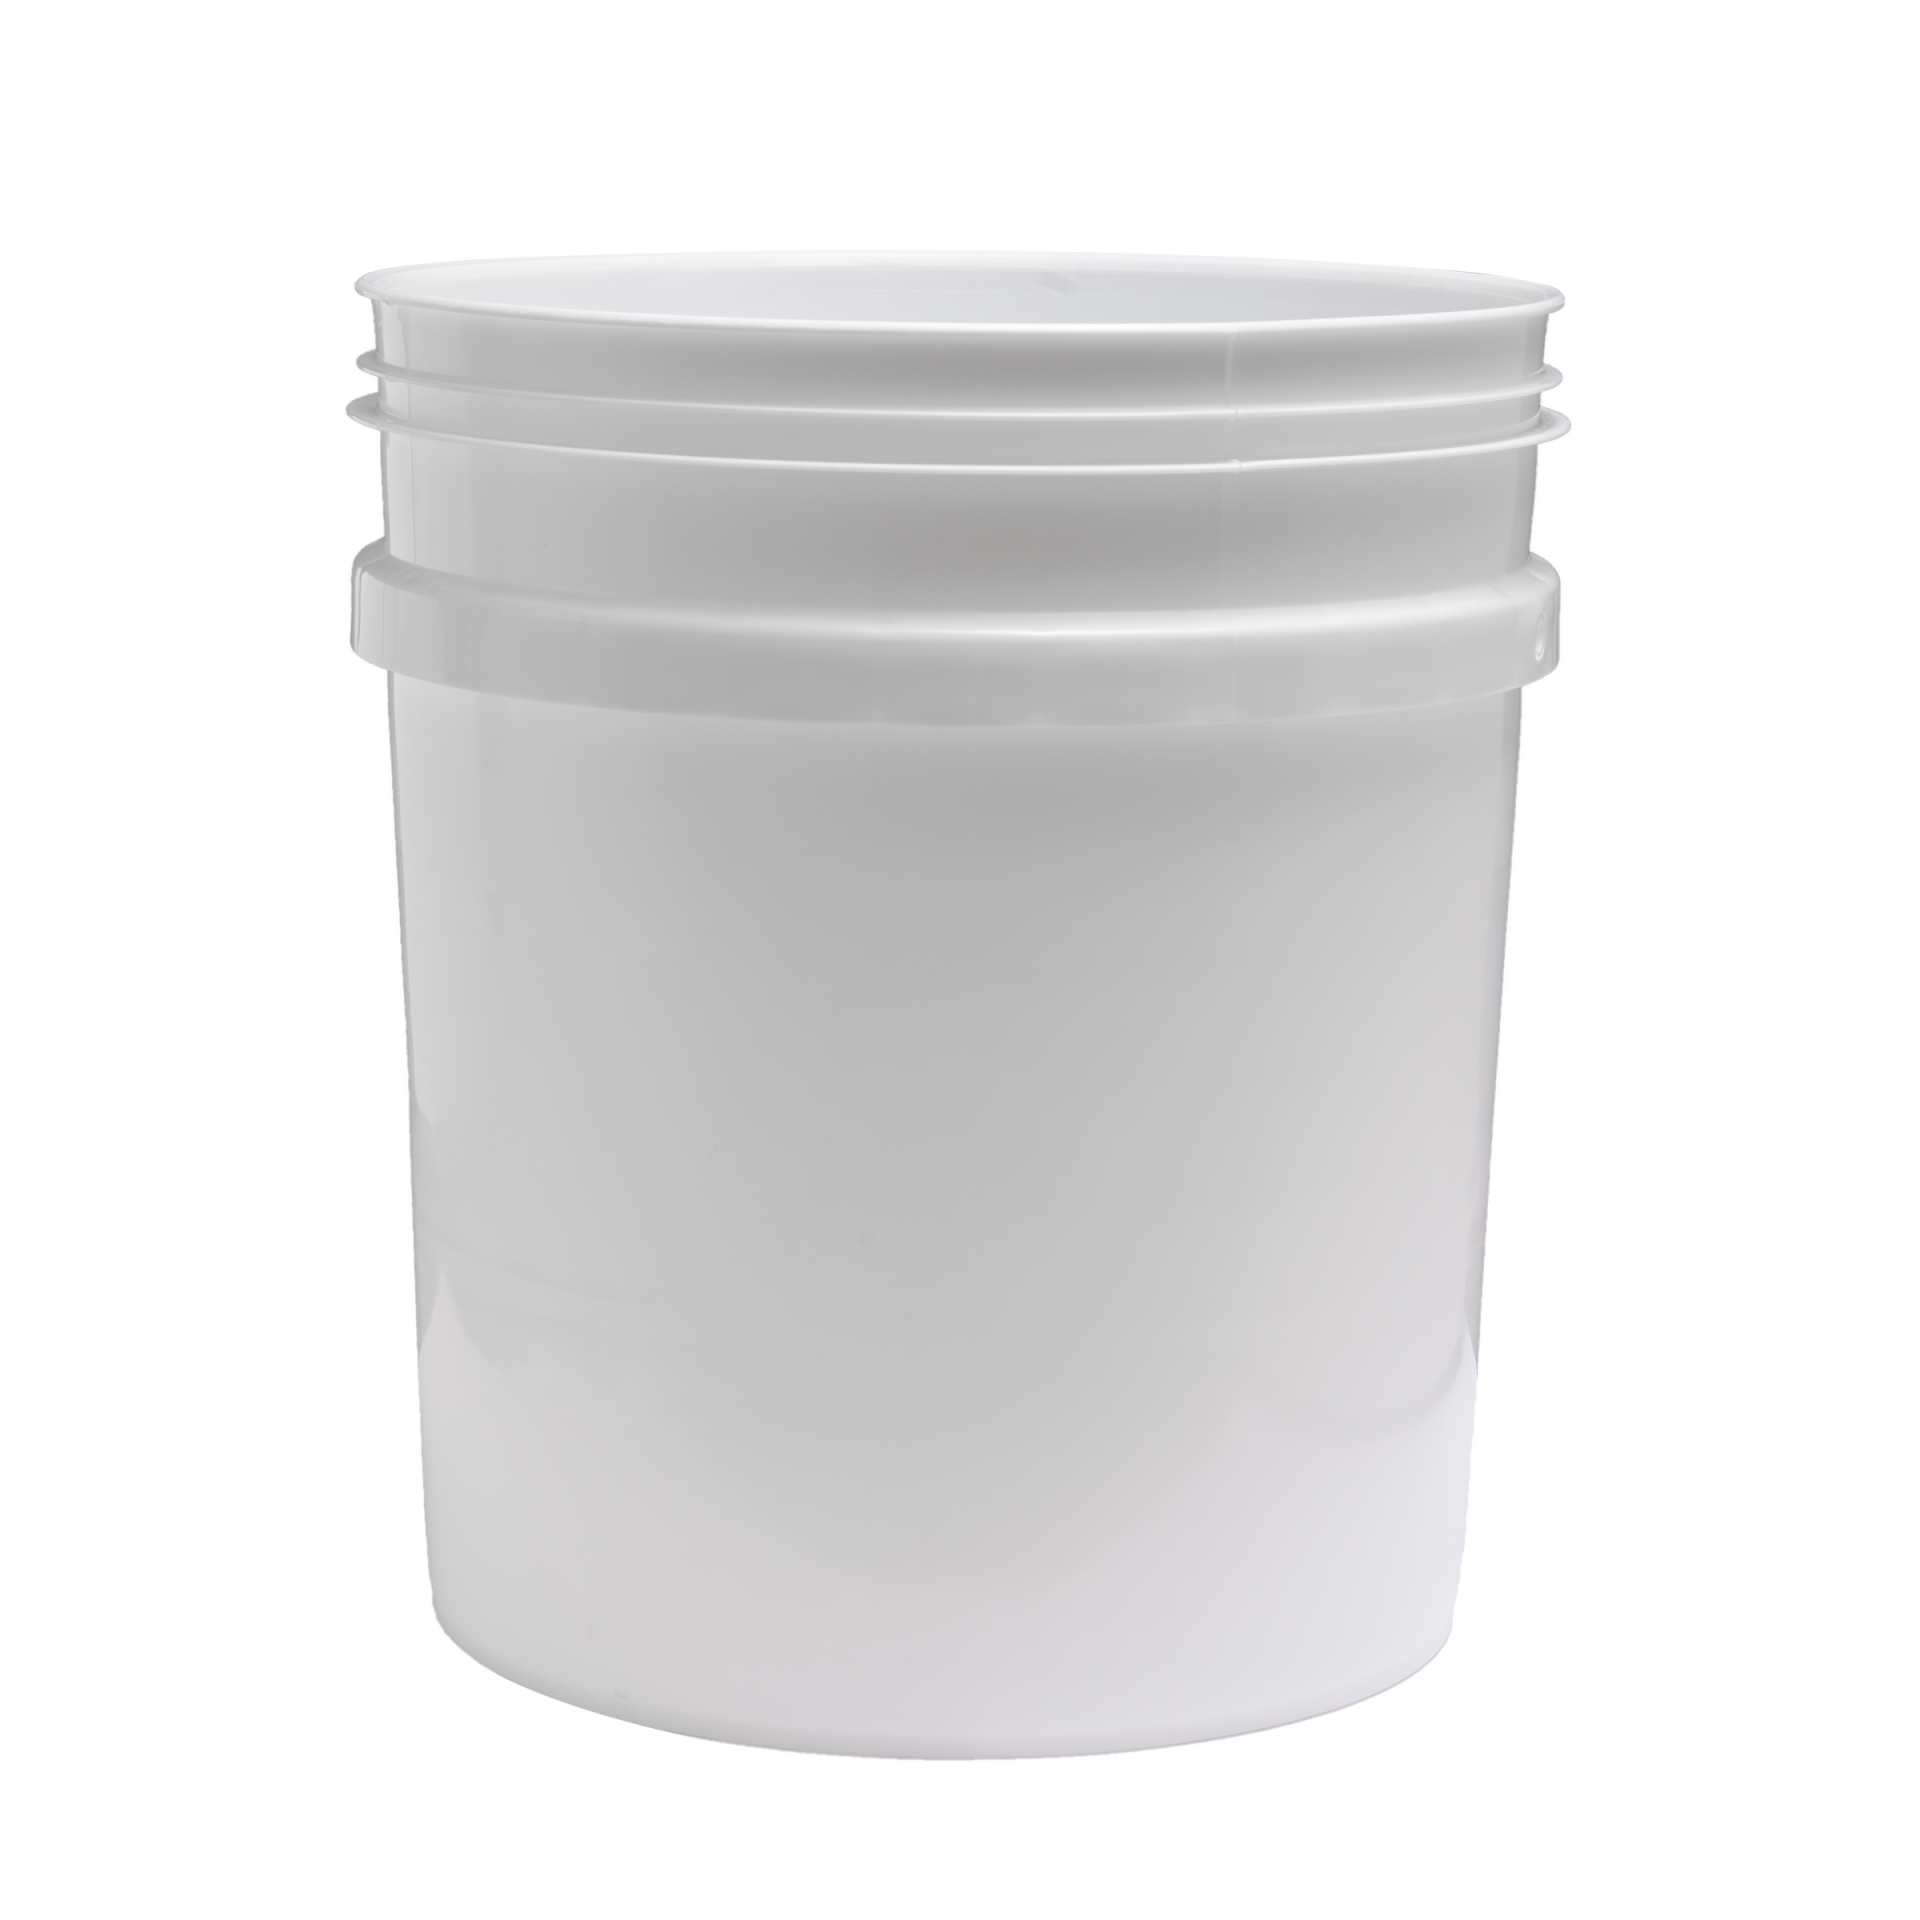 https://www.containersupplycompany.com/wp-content/uploads/2020/03/4-1_4-Gallon-Pail-Round-White-1920x1920.png